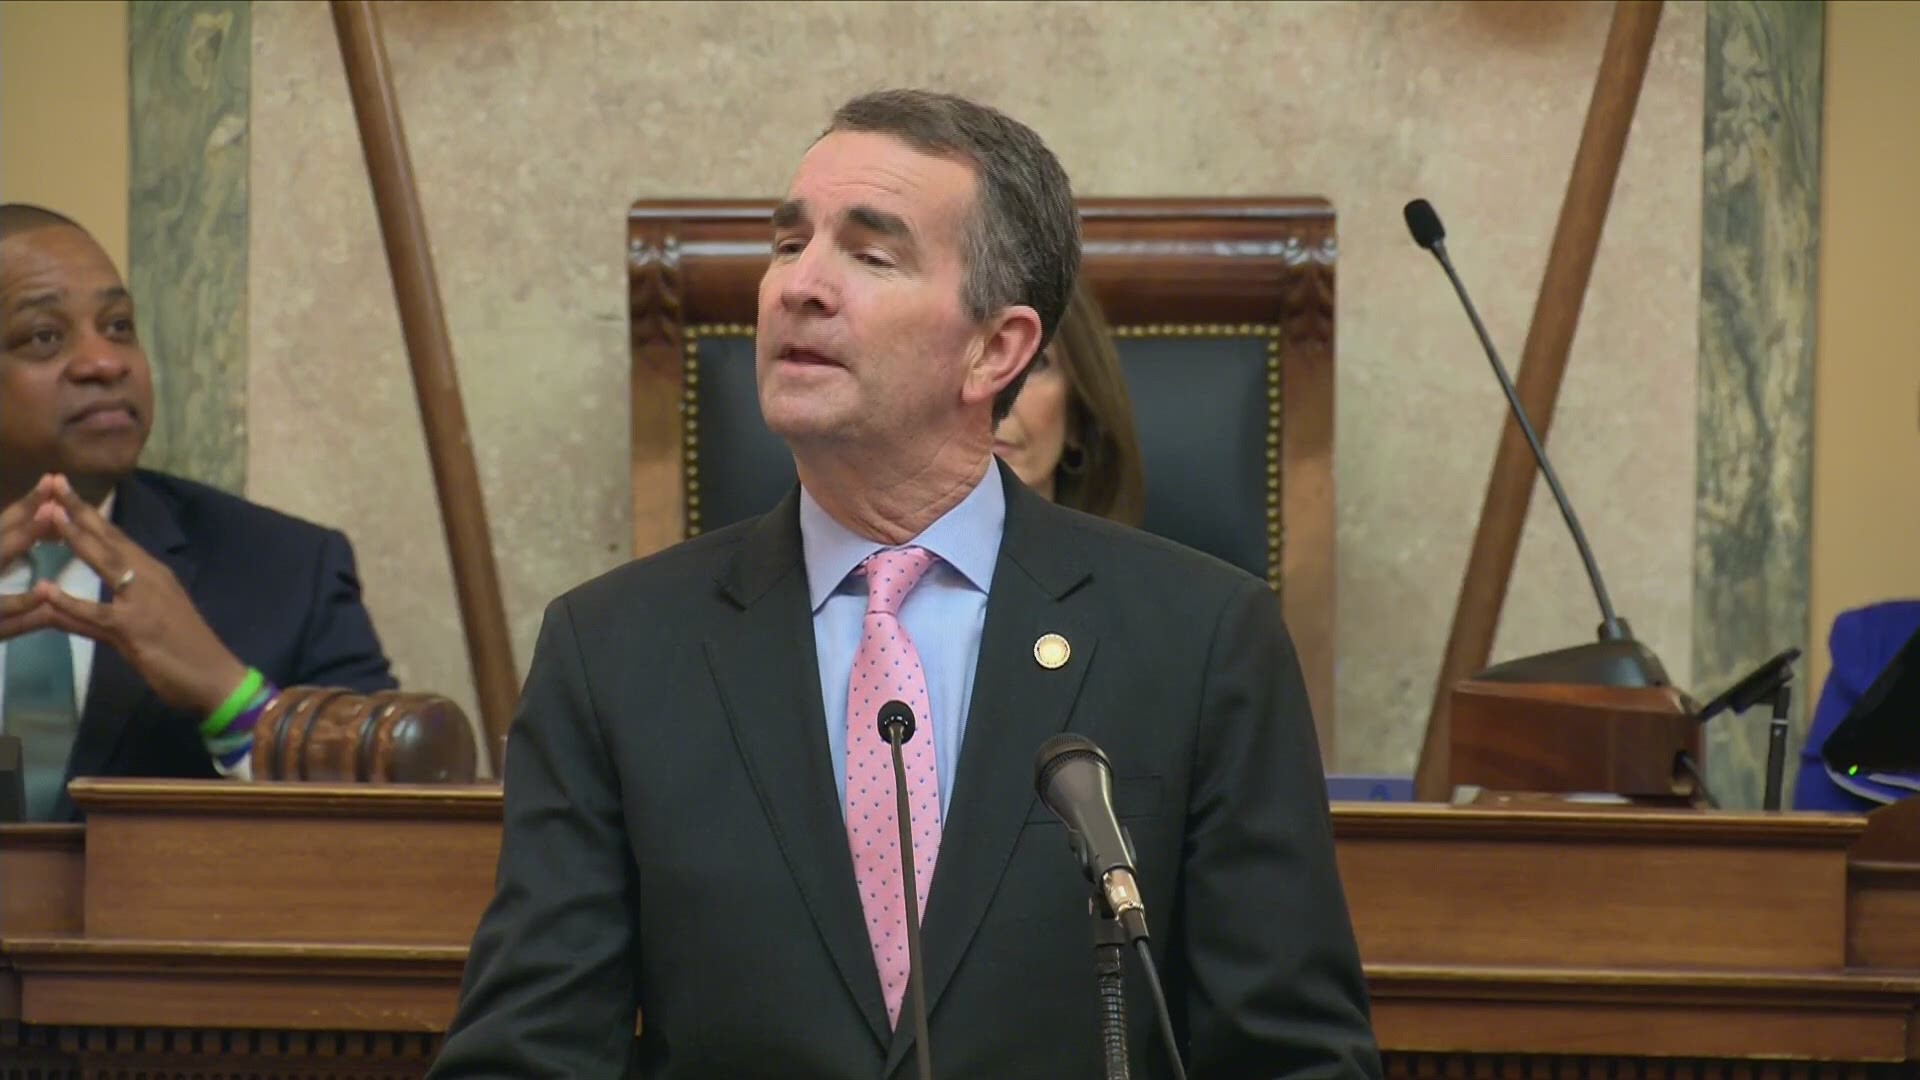 Gov. Ralph Northam said in his State of the Commonwealth address that he wants to enact more "common sense" gun laws in Virginia.